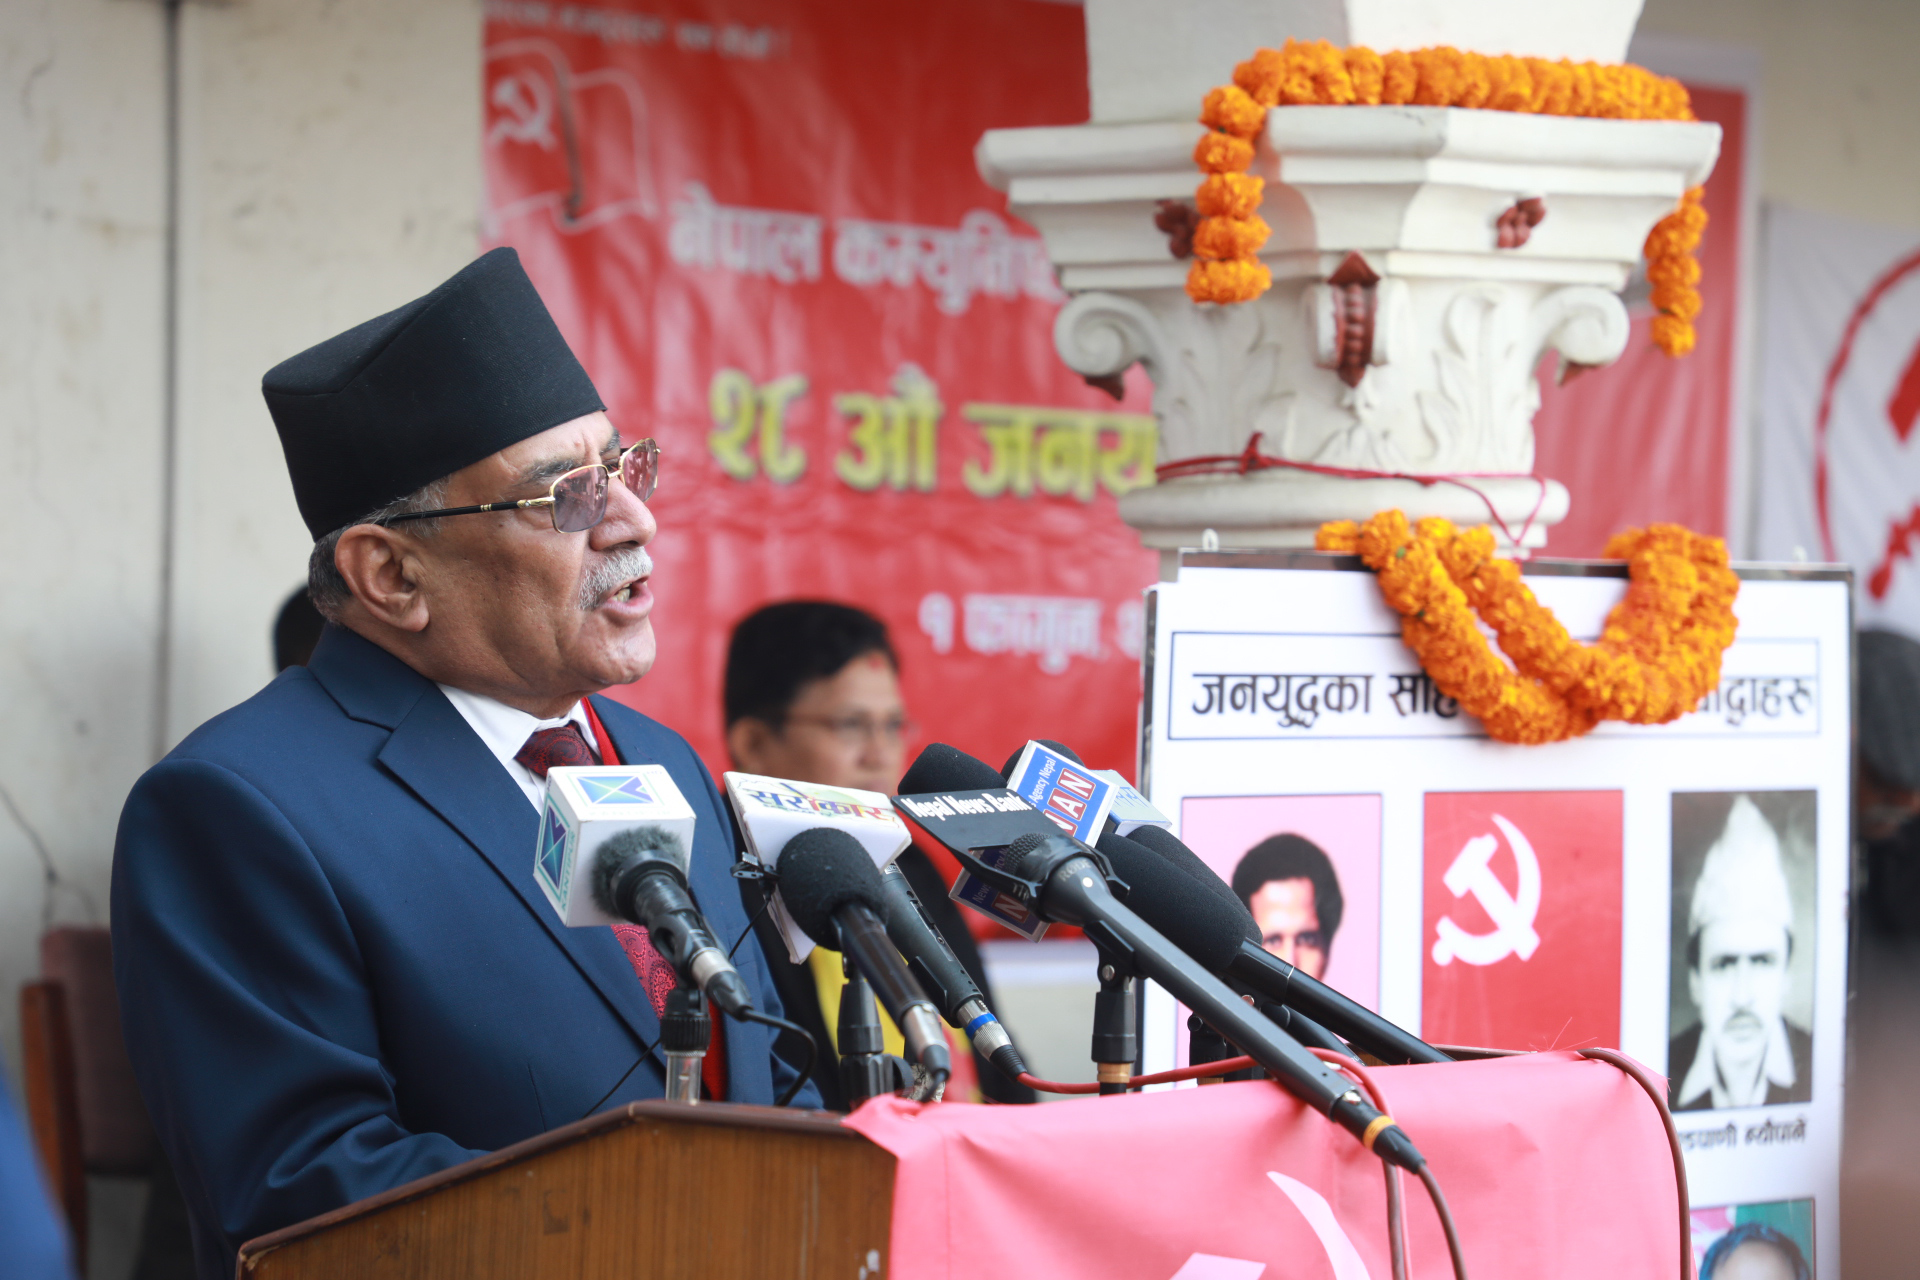 People's War Day is now the property of Nepal: PM Dahal